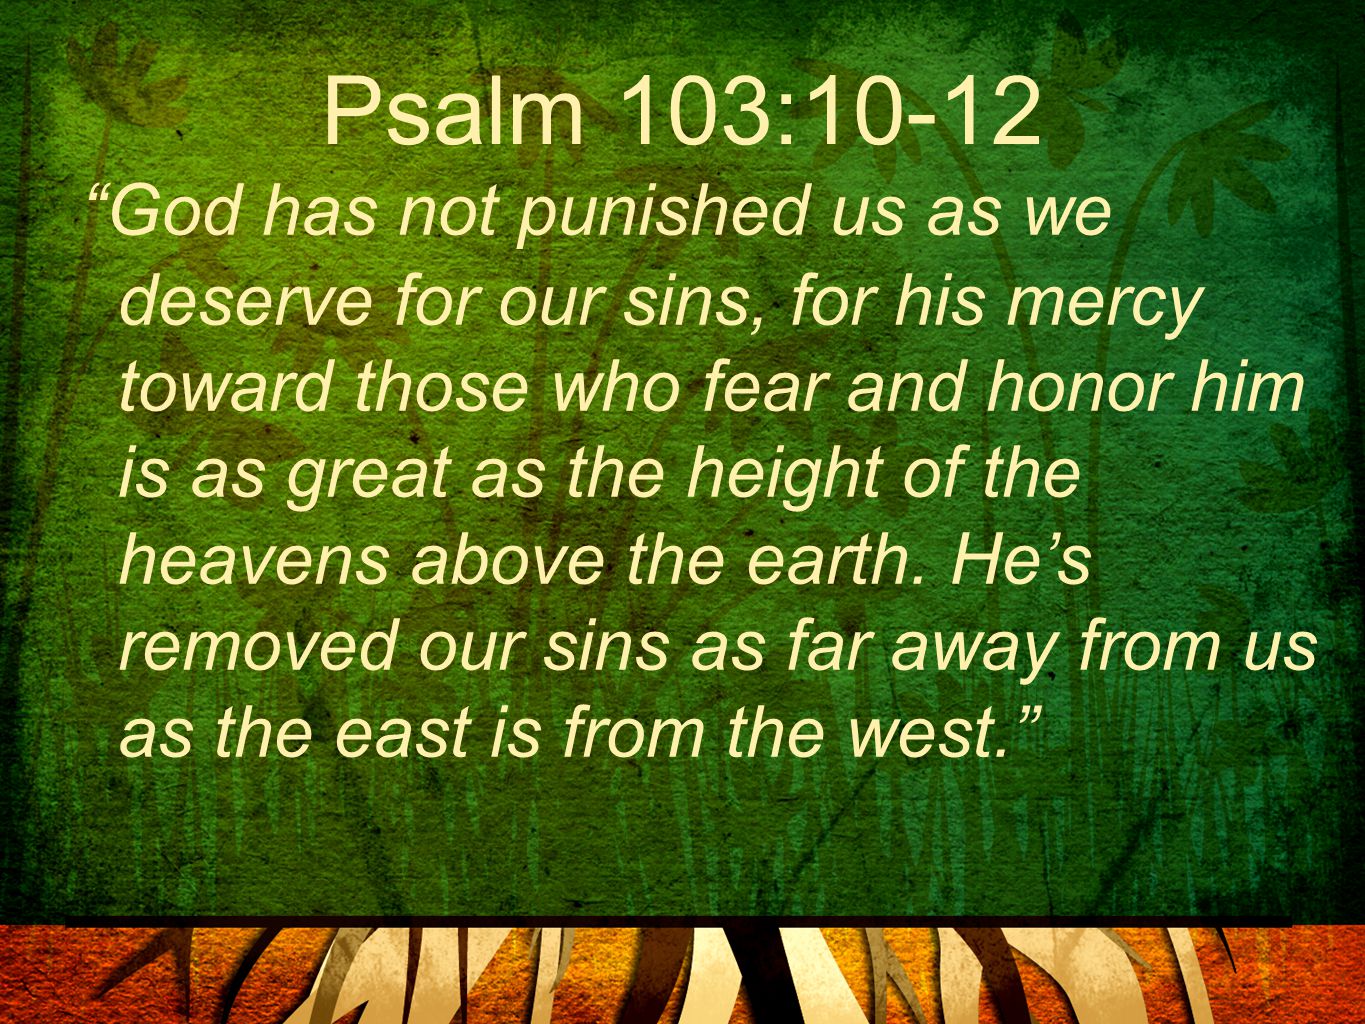 Psalm 103:10-12 God has not punished us as we deserve for our sins, for his mercy toward those who fear and honor him is as great as the height of the heavens above the earth.